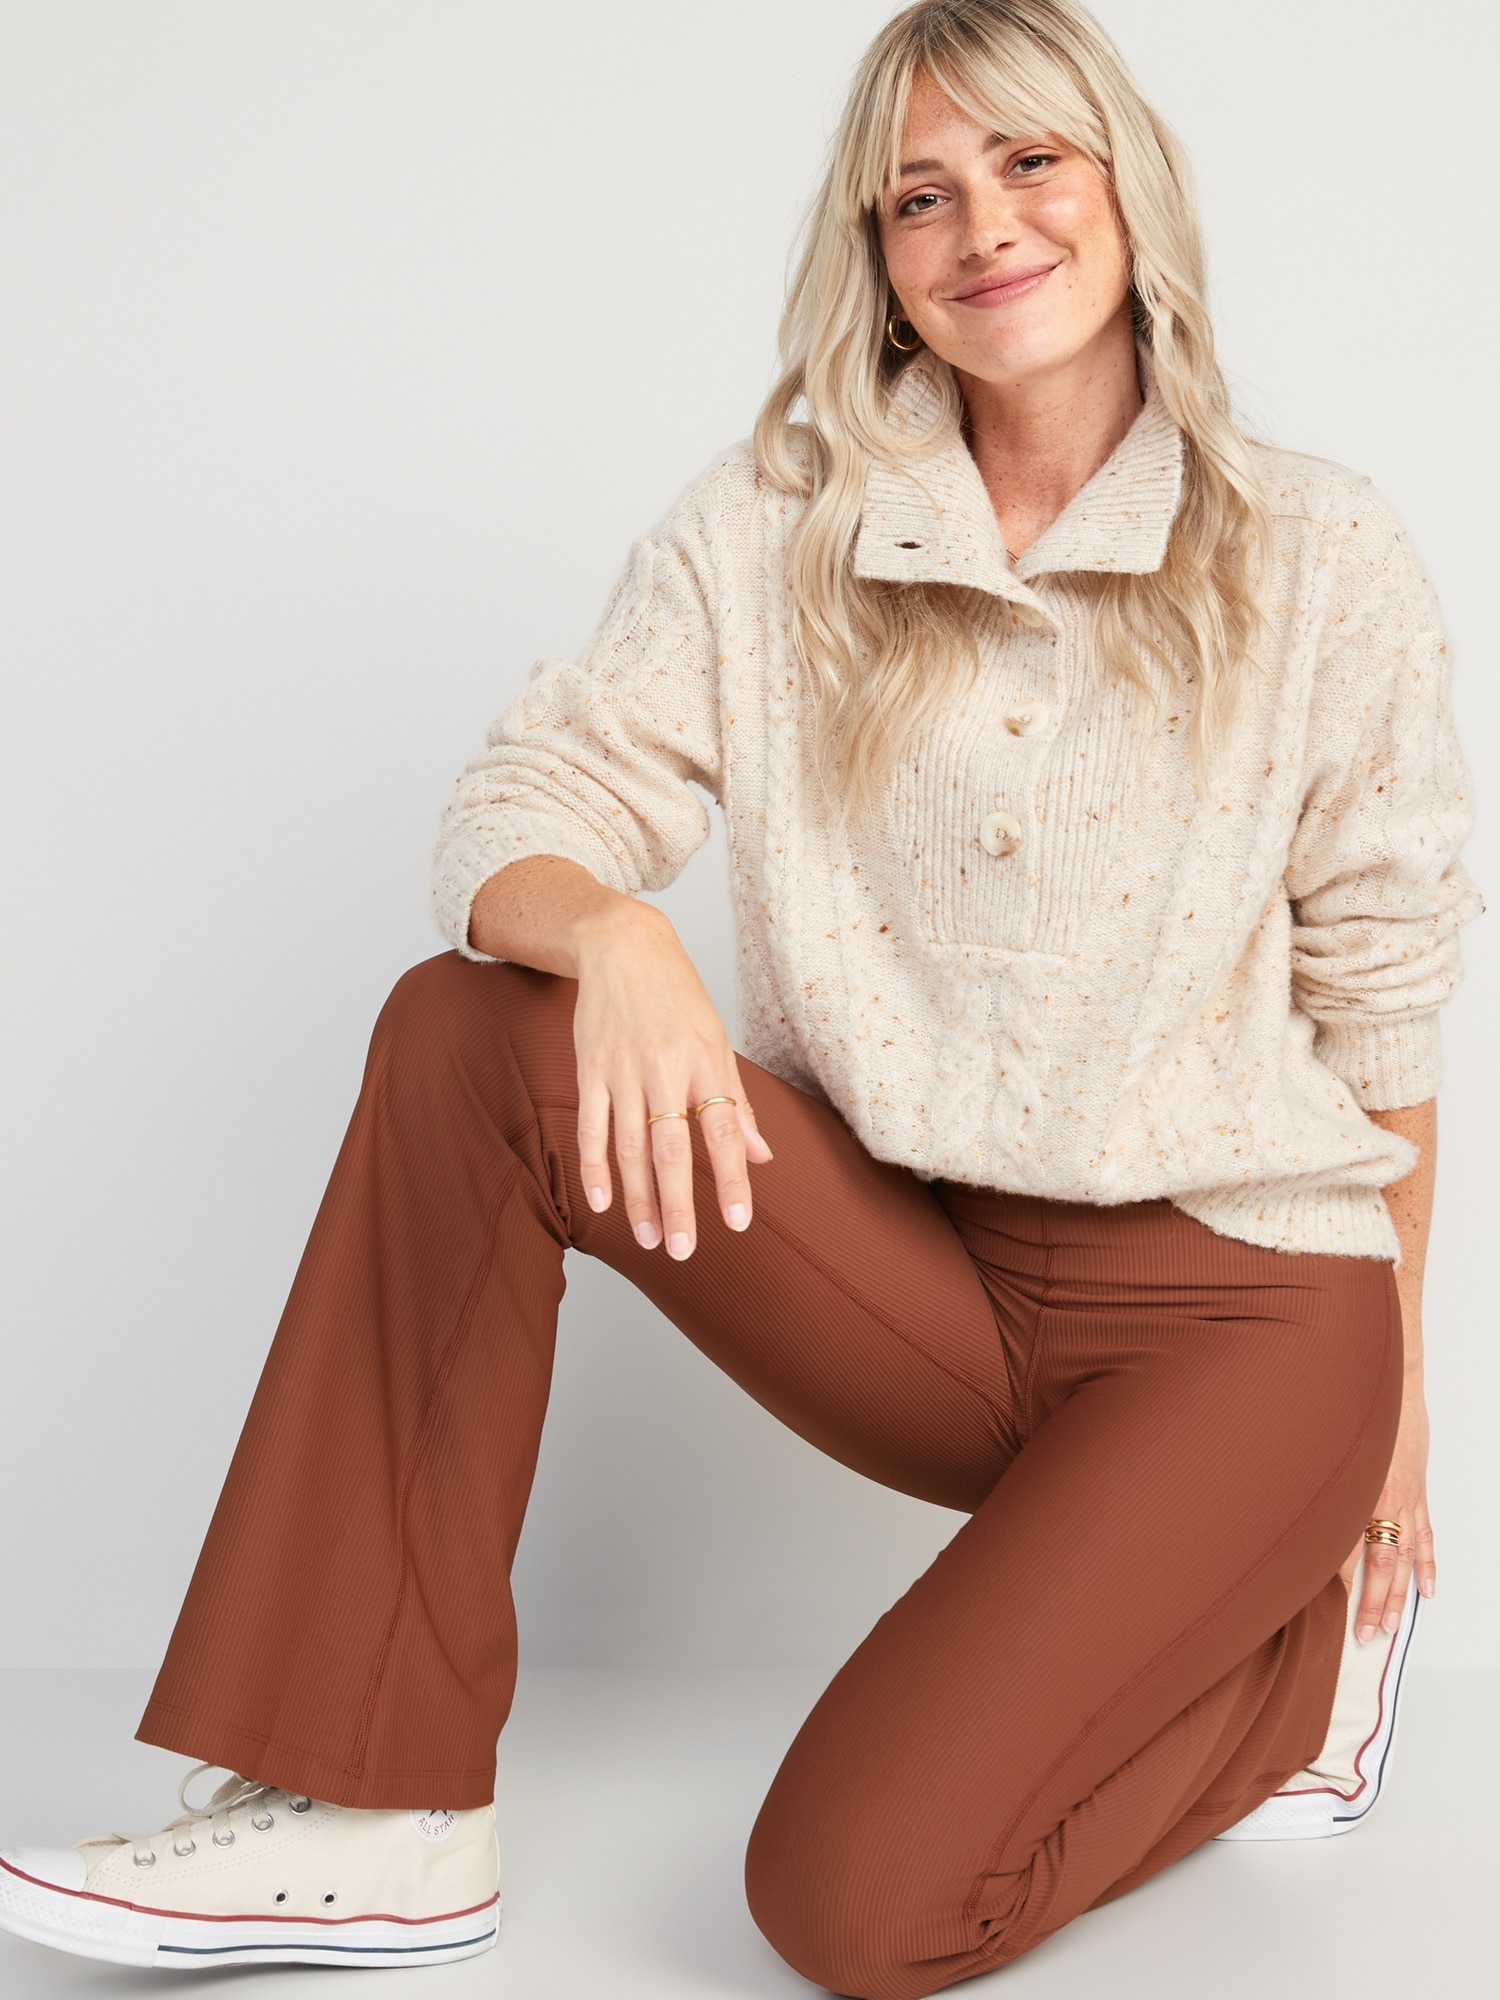 Extra High-Waisted PowerSoft Rib-Knit Flare Pants for Women, Old Navy